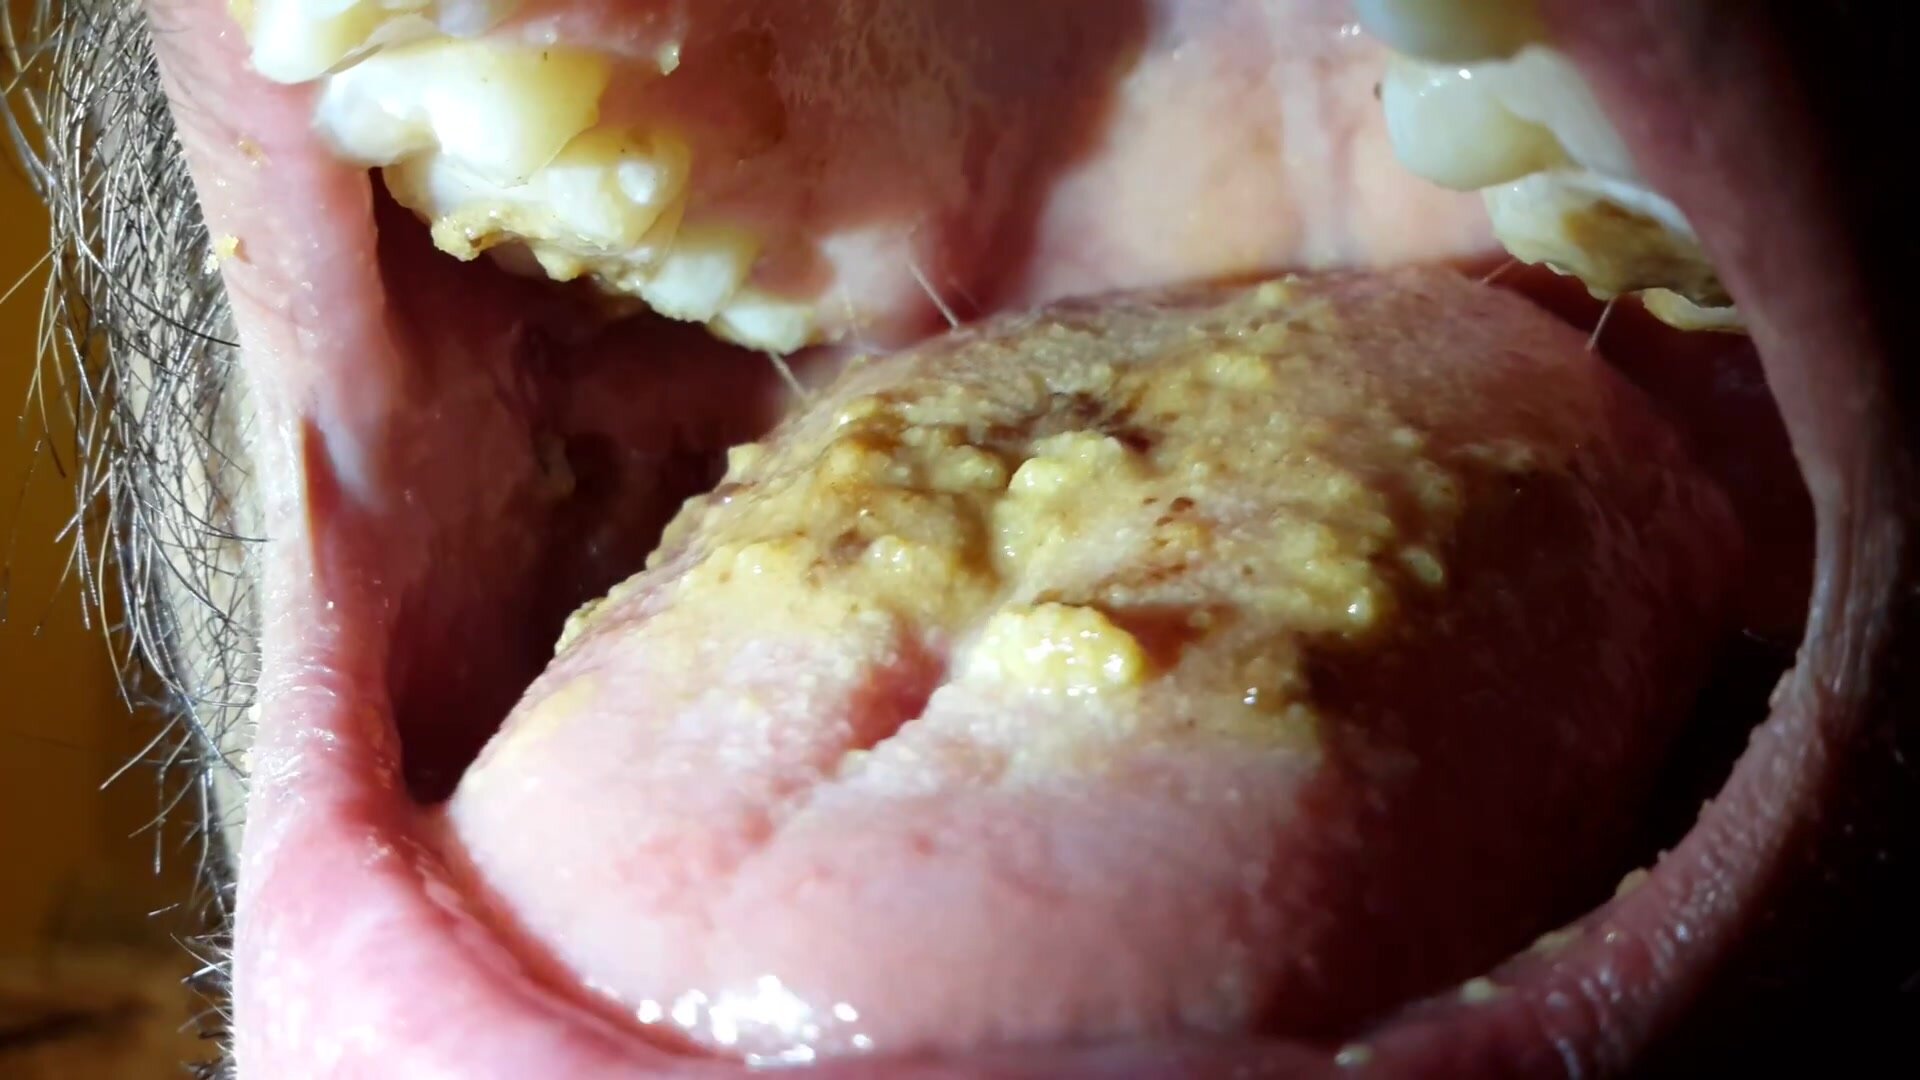 Mouthcam human tongue with food